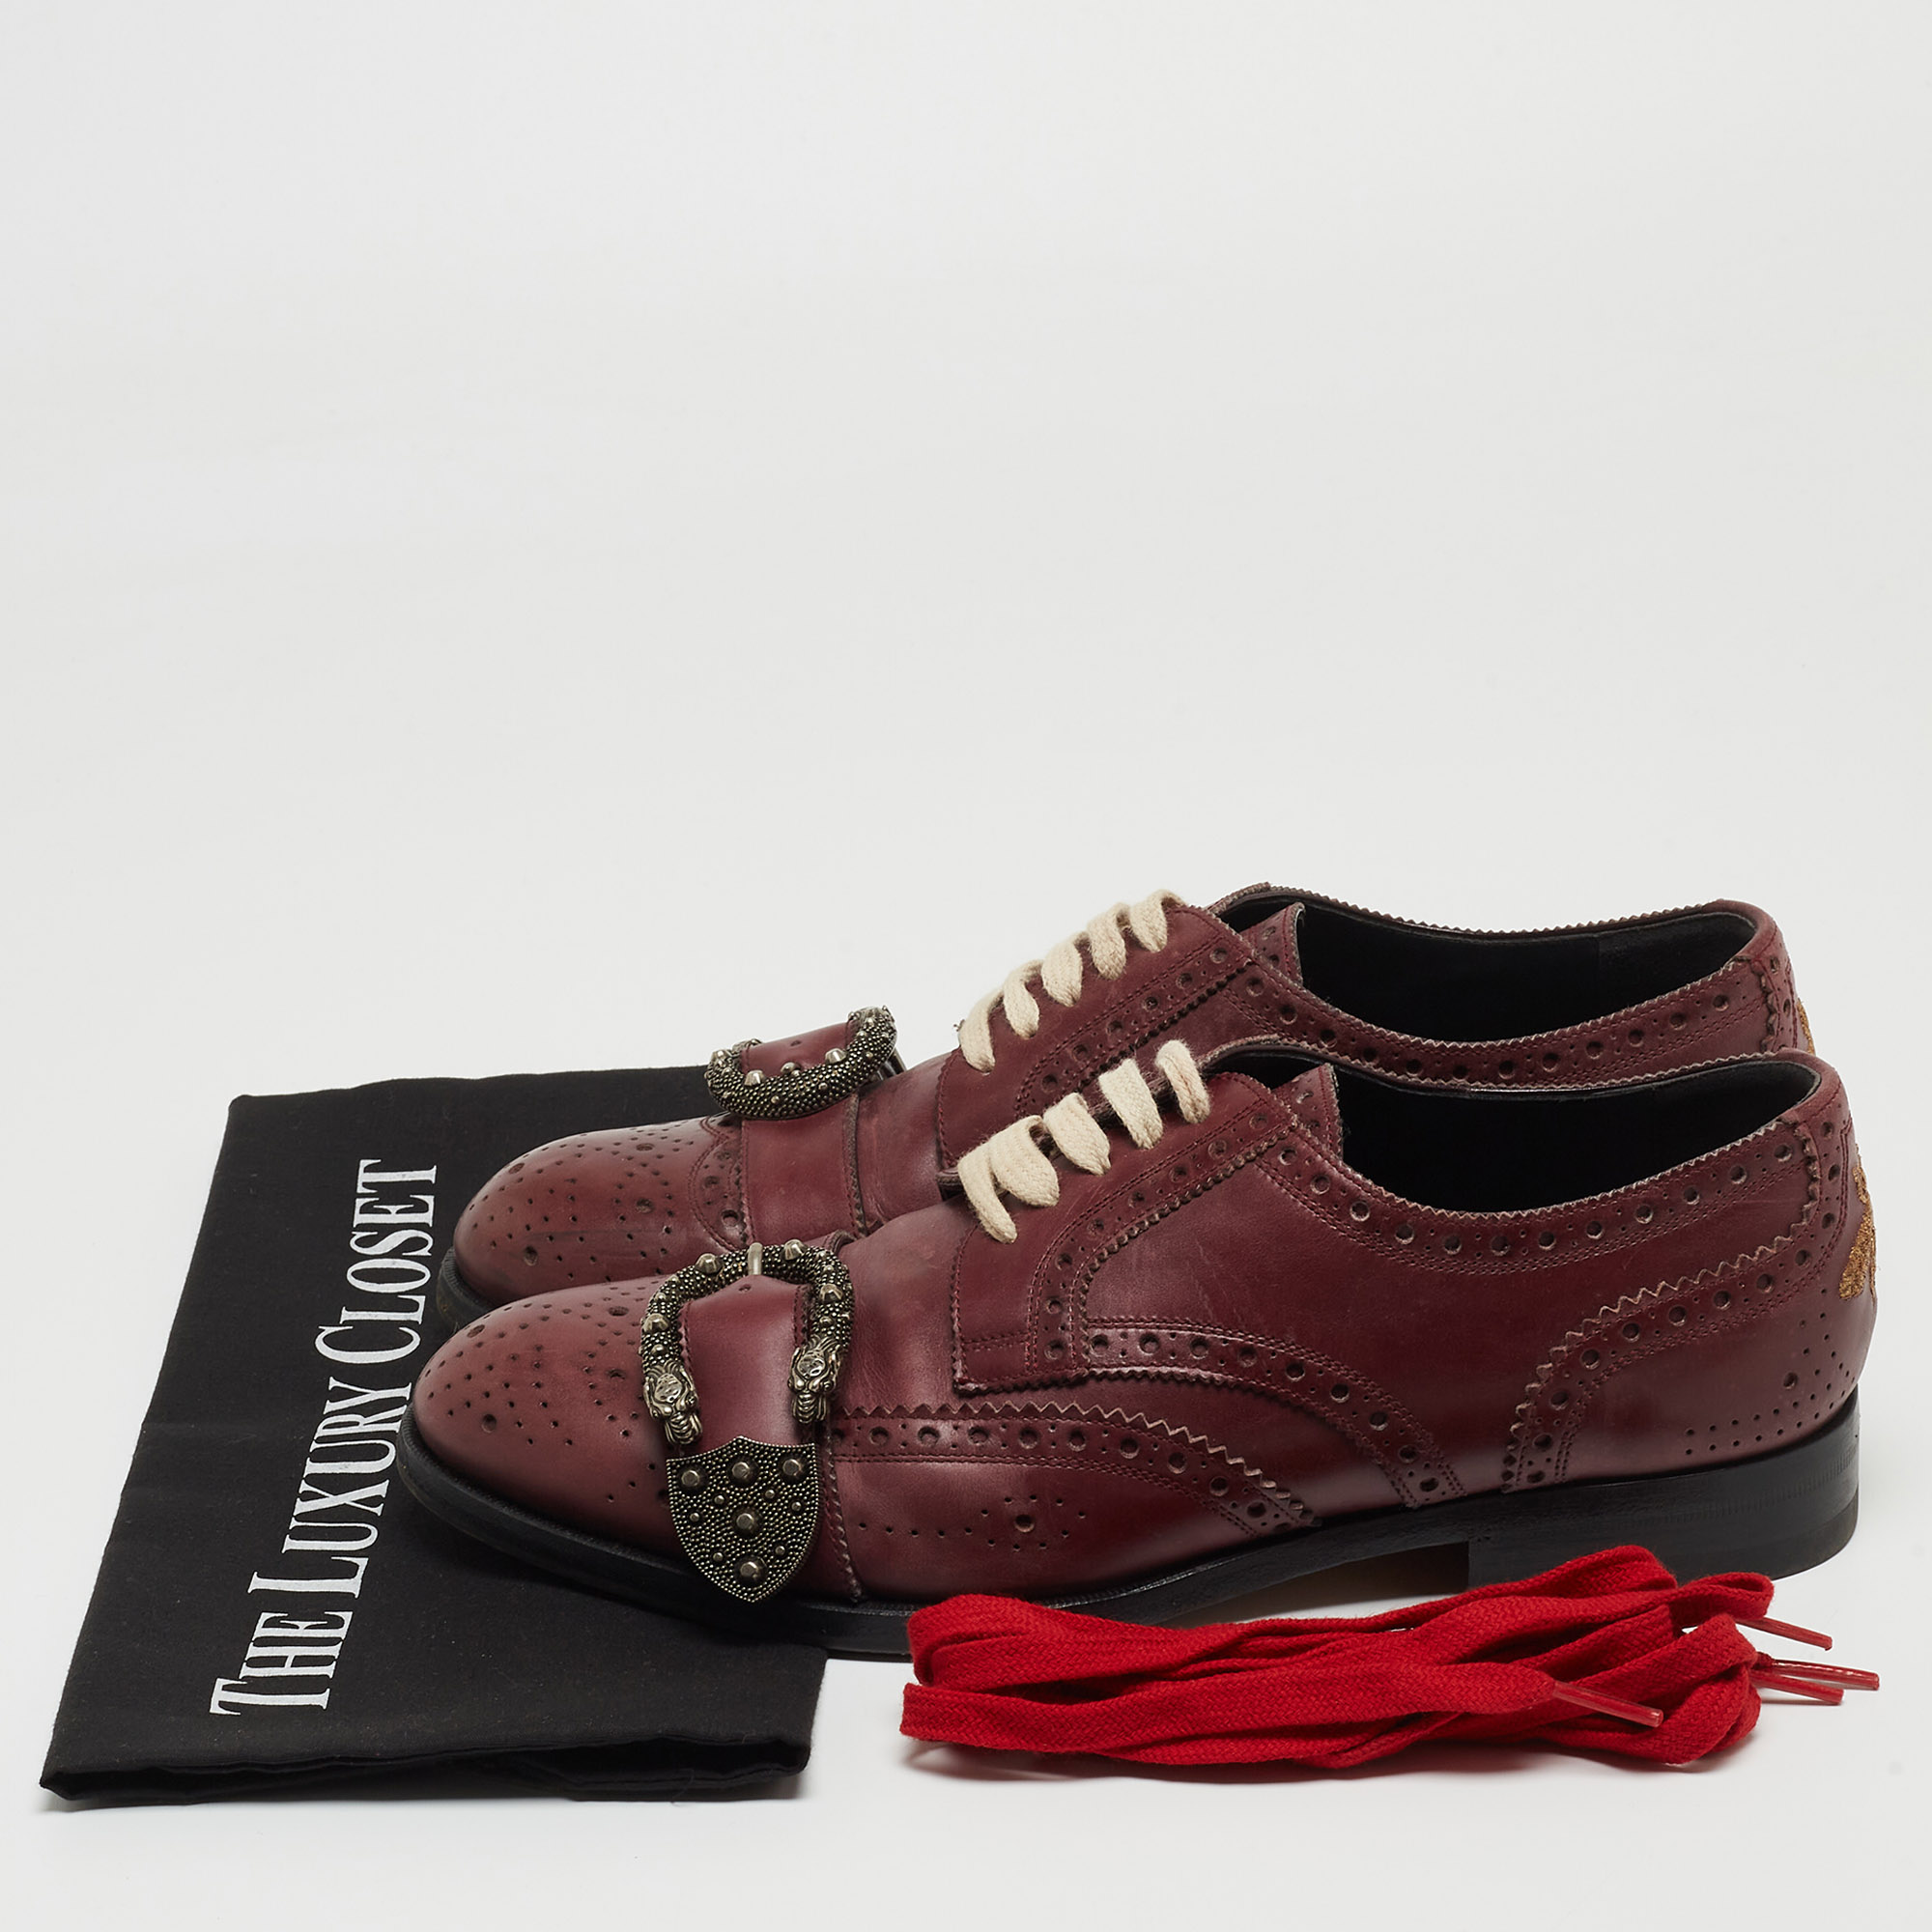 Gucci Purple Leather Queercore Brogue Derby Size 41